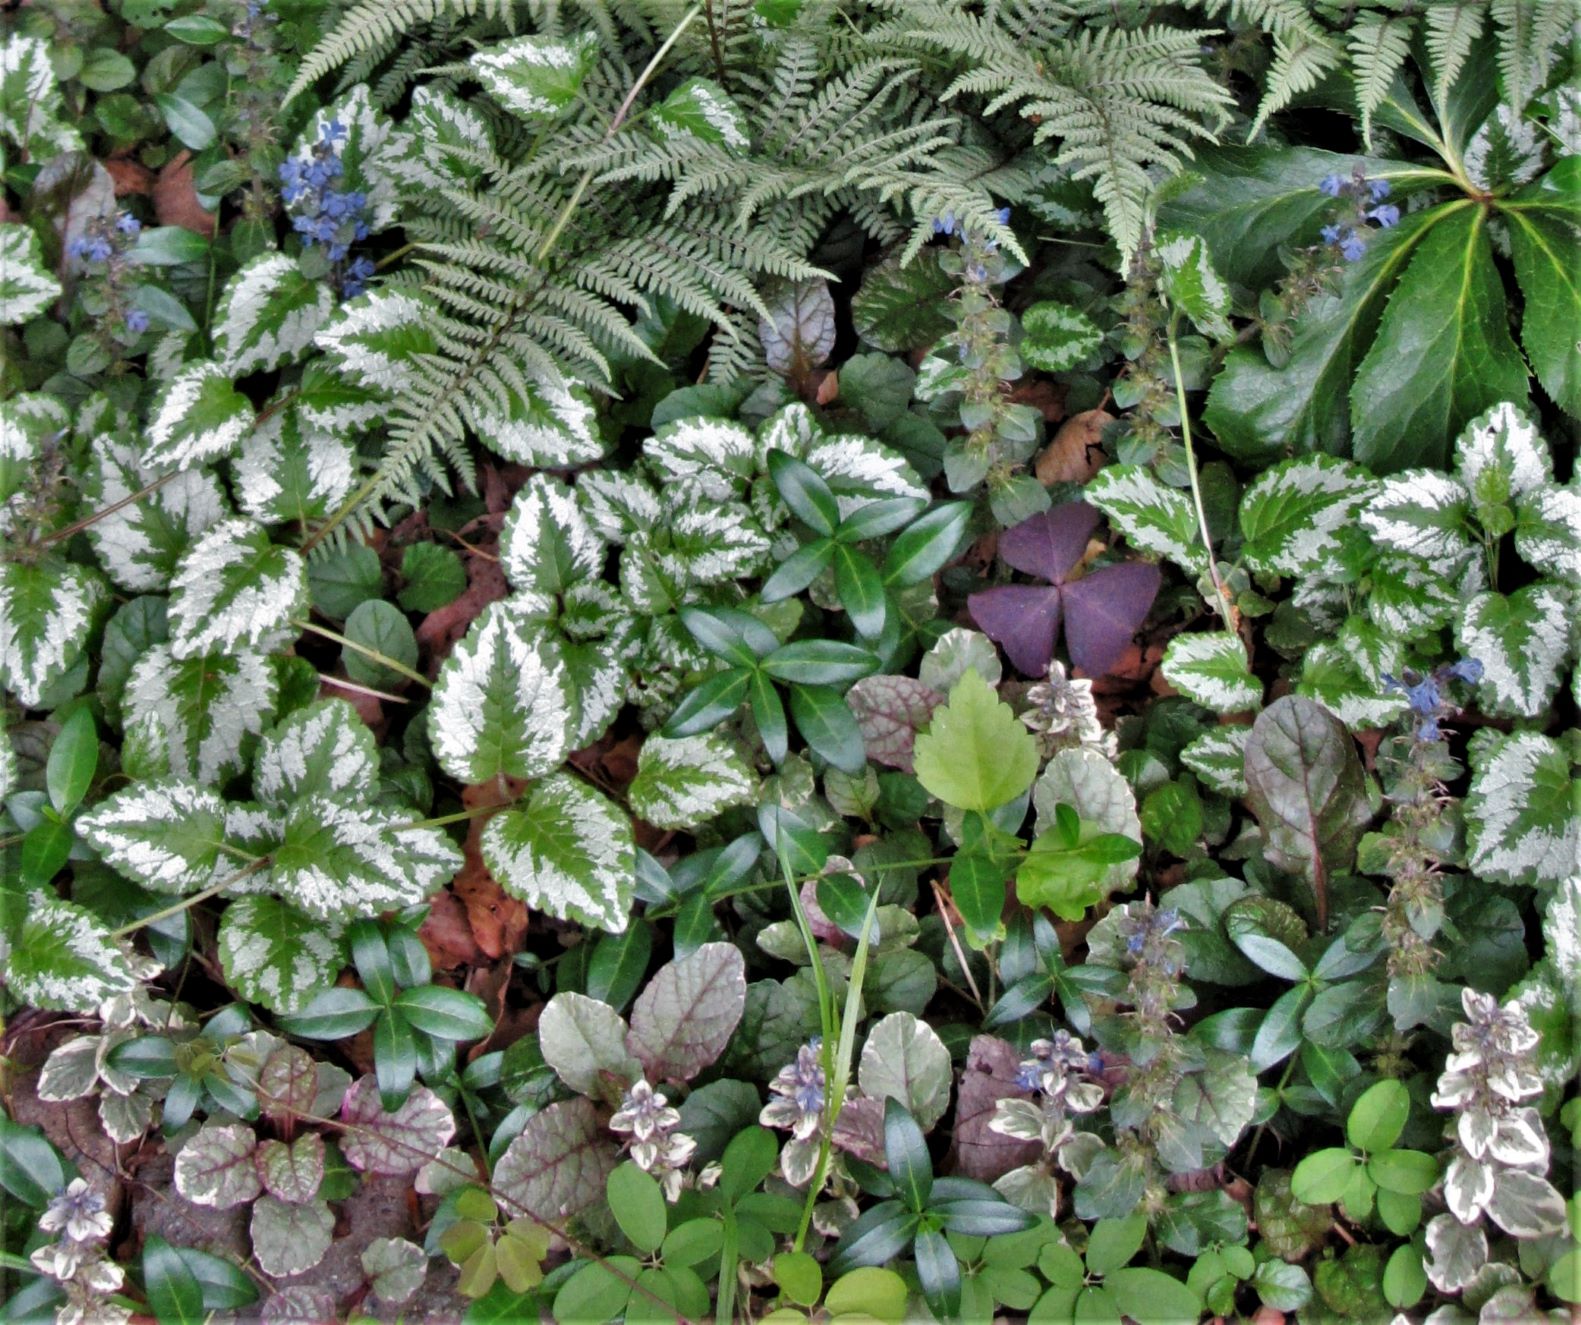 ground cover plants